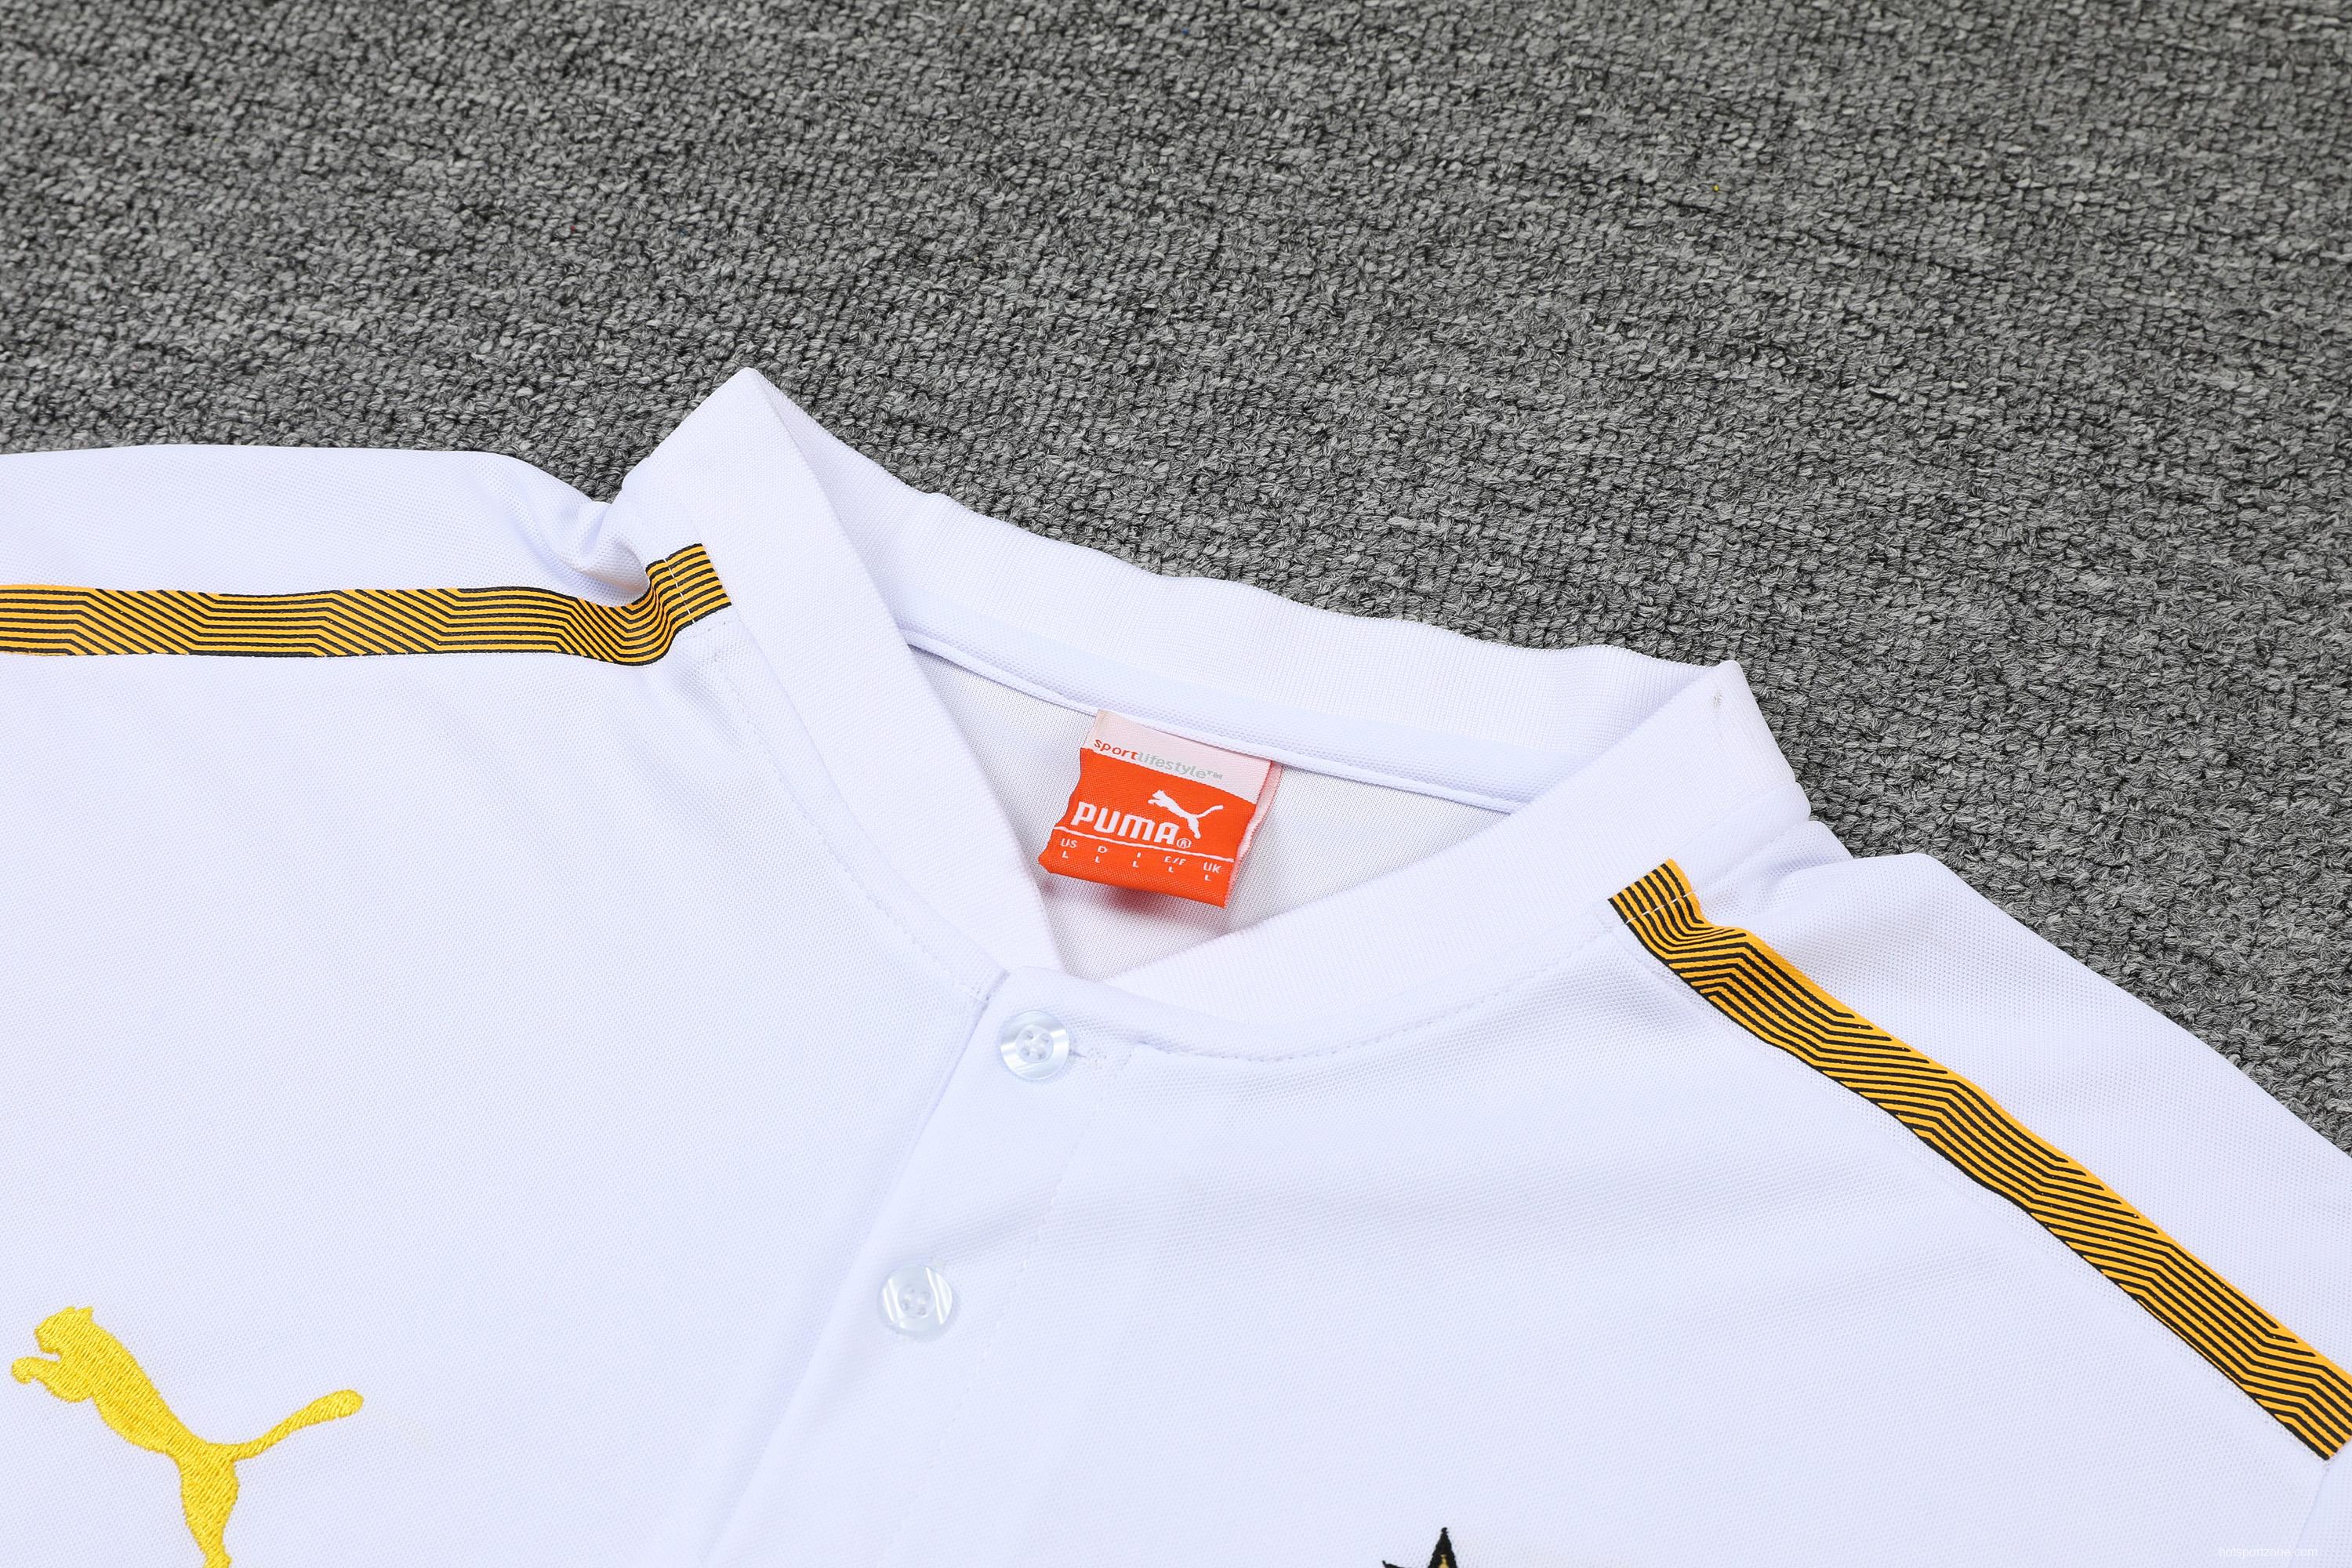 Borussia Dortmund POLO kit White (not supported to be sold separately)